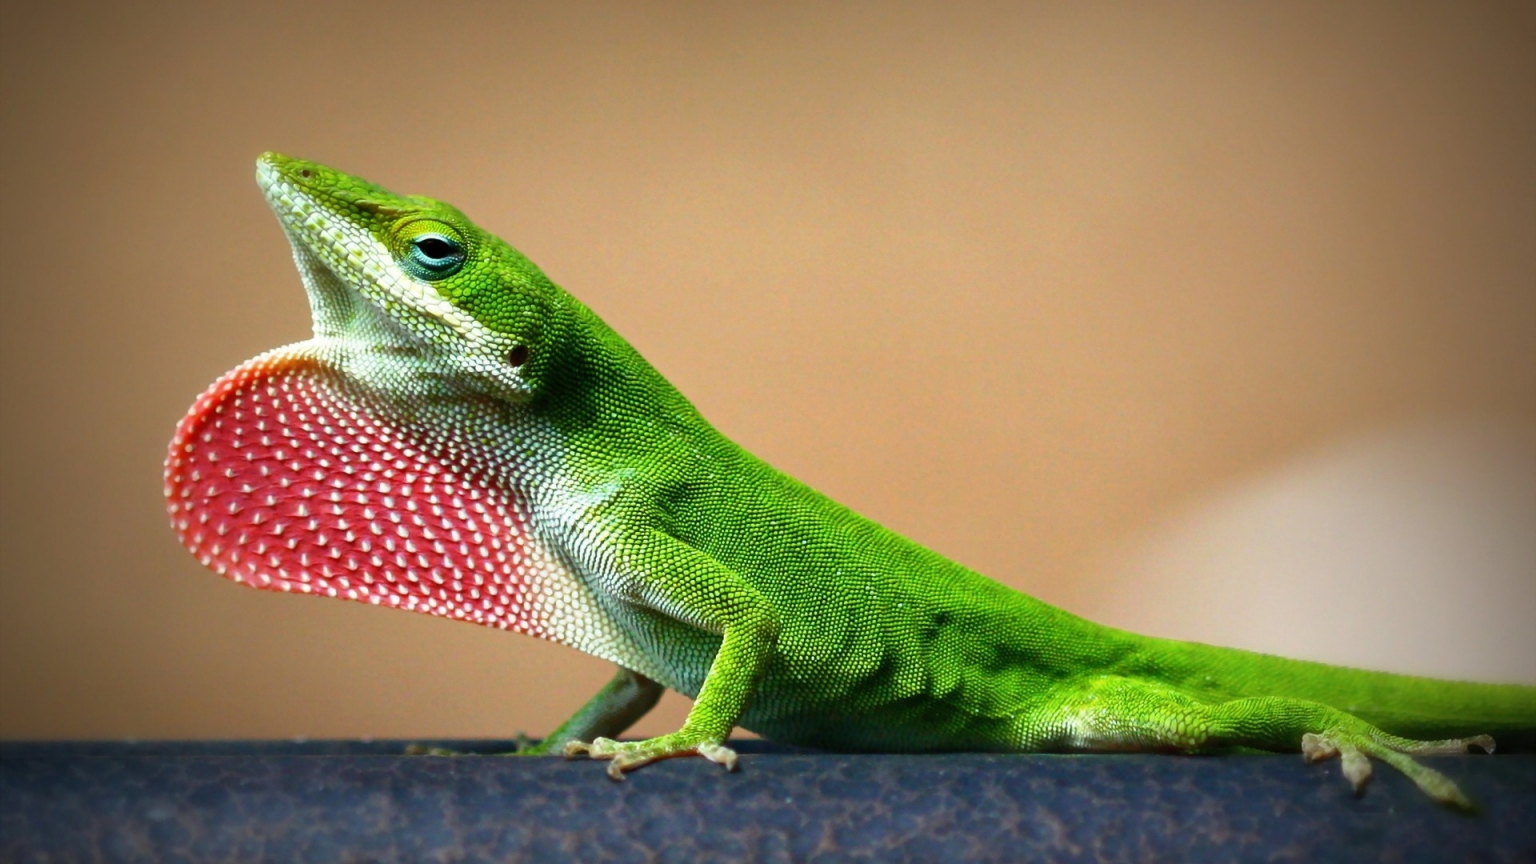 Young Lizard for 1536 x 864 HDTV resolution